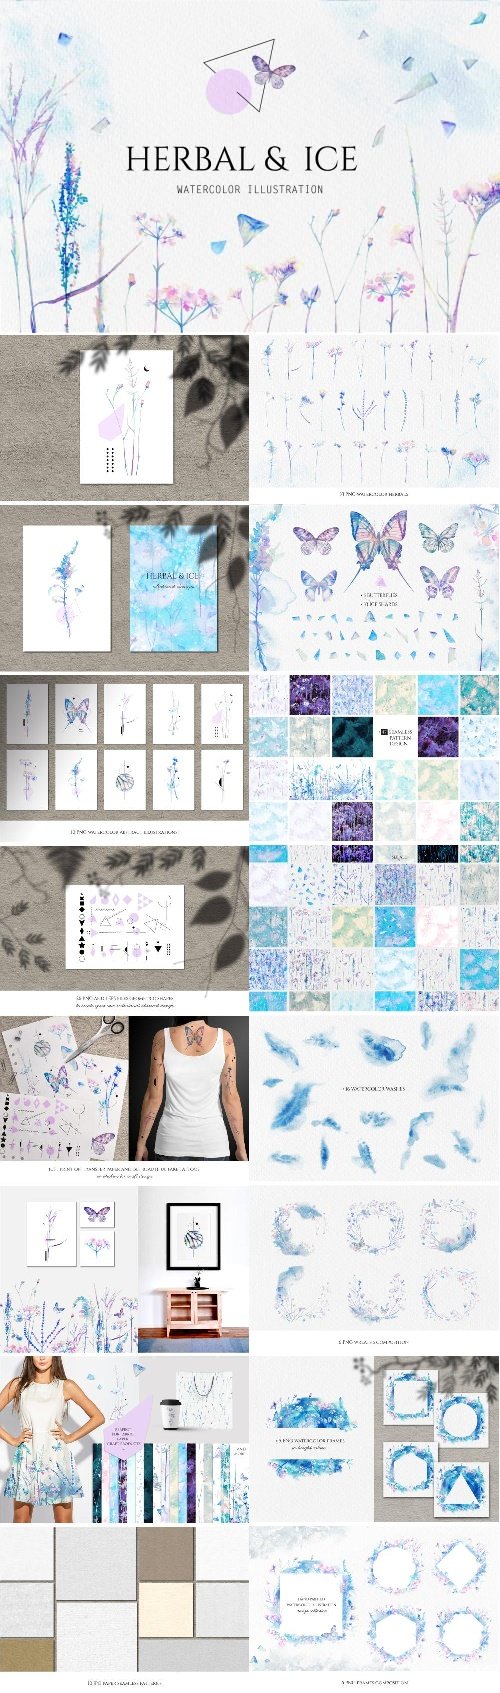 Watercolor floral design collection, herbal and ice